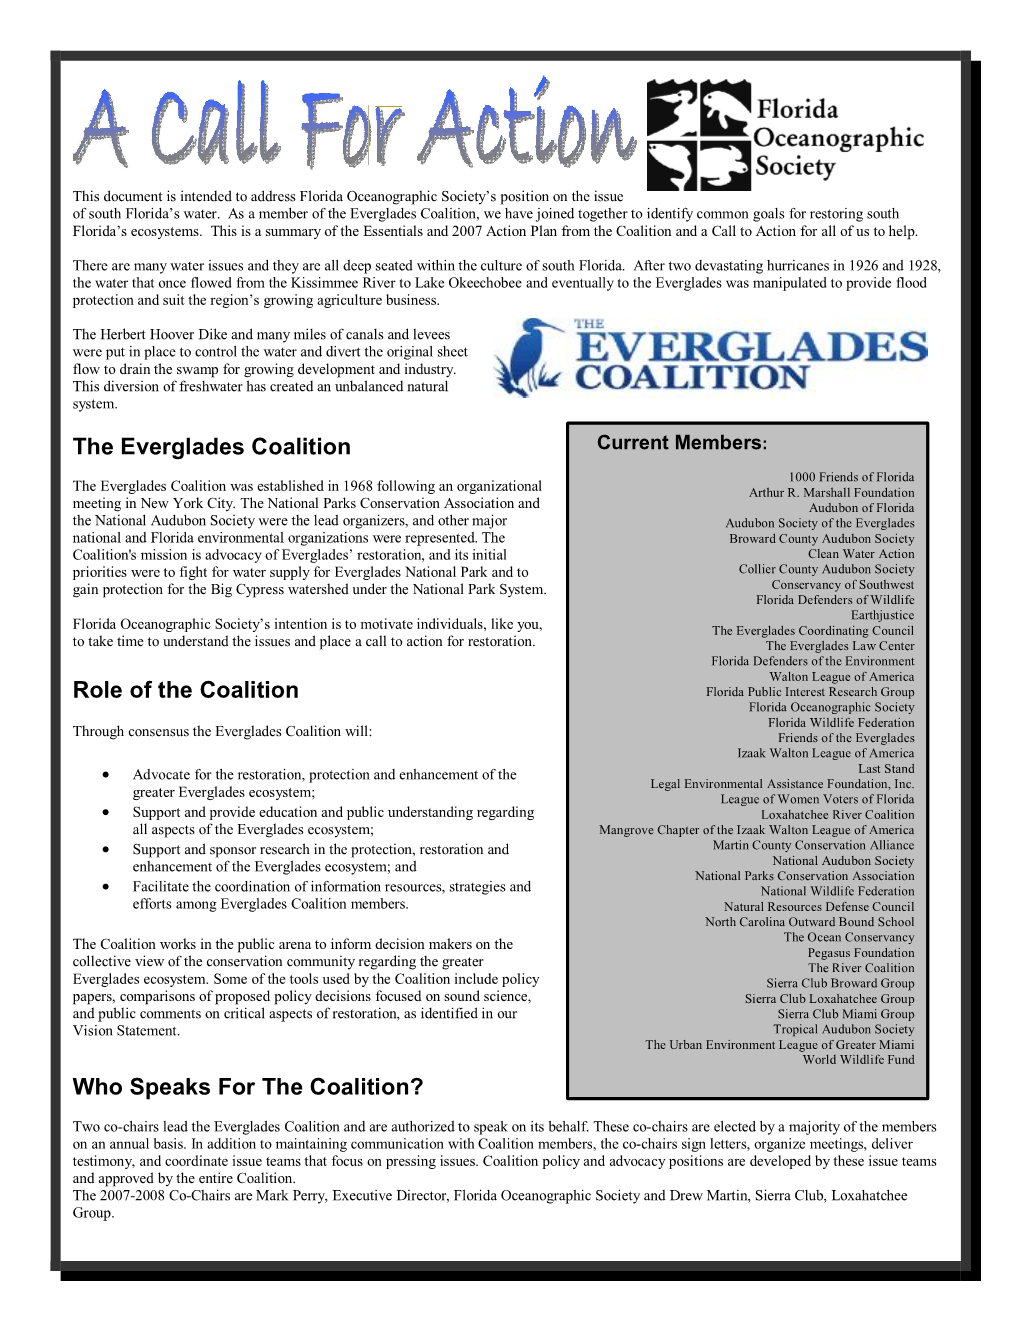 The Everglades Coalition Role of The